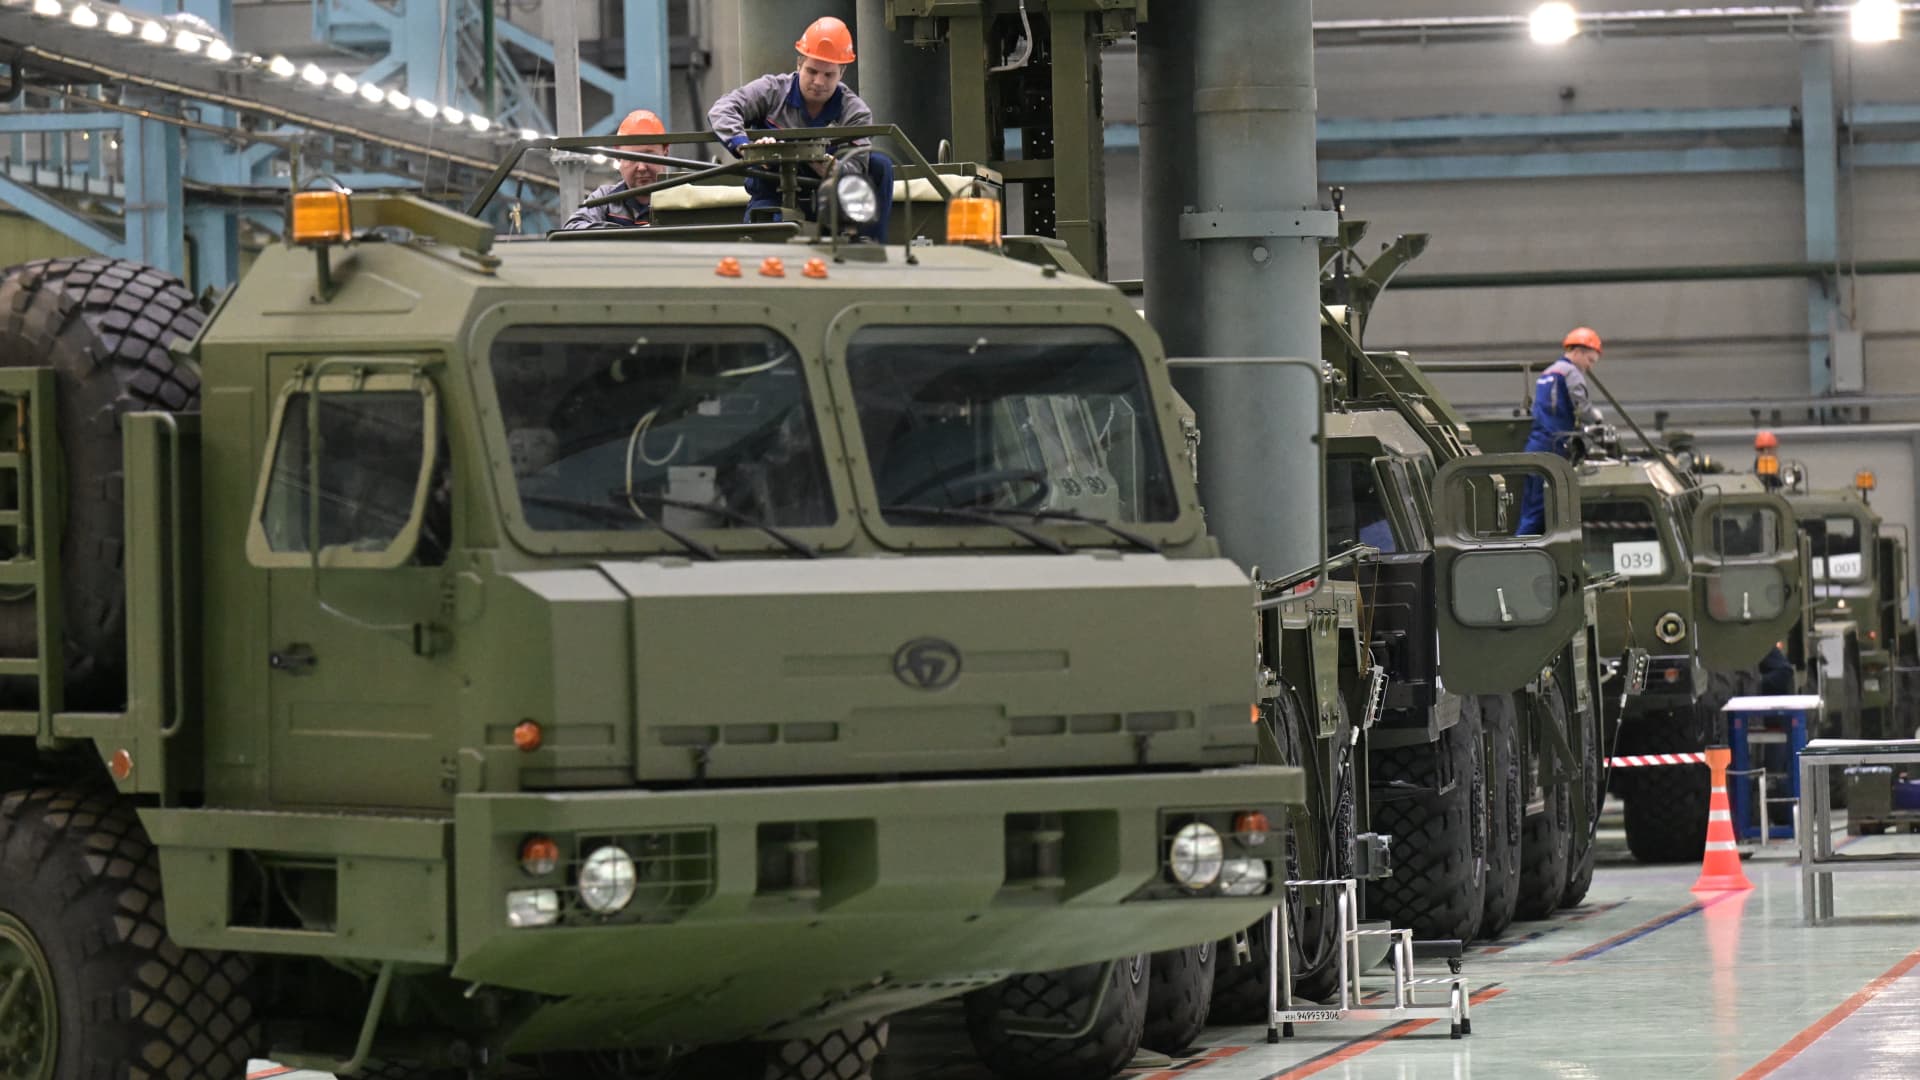 Military vehicles at a plant that is part of Russian missile manufacturer Almaz-Antey, in St. Petersburg, on Jan. 18, 2023.